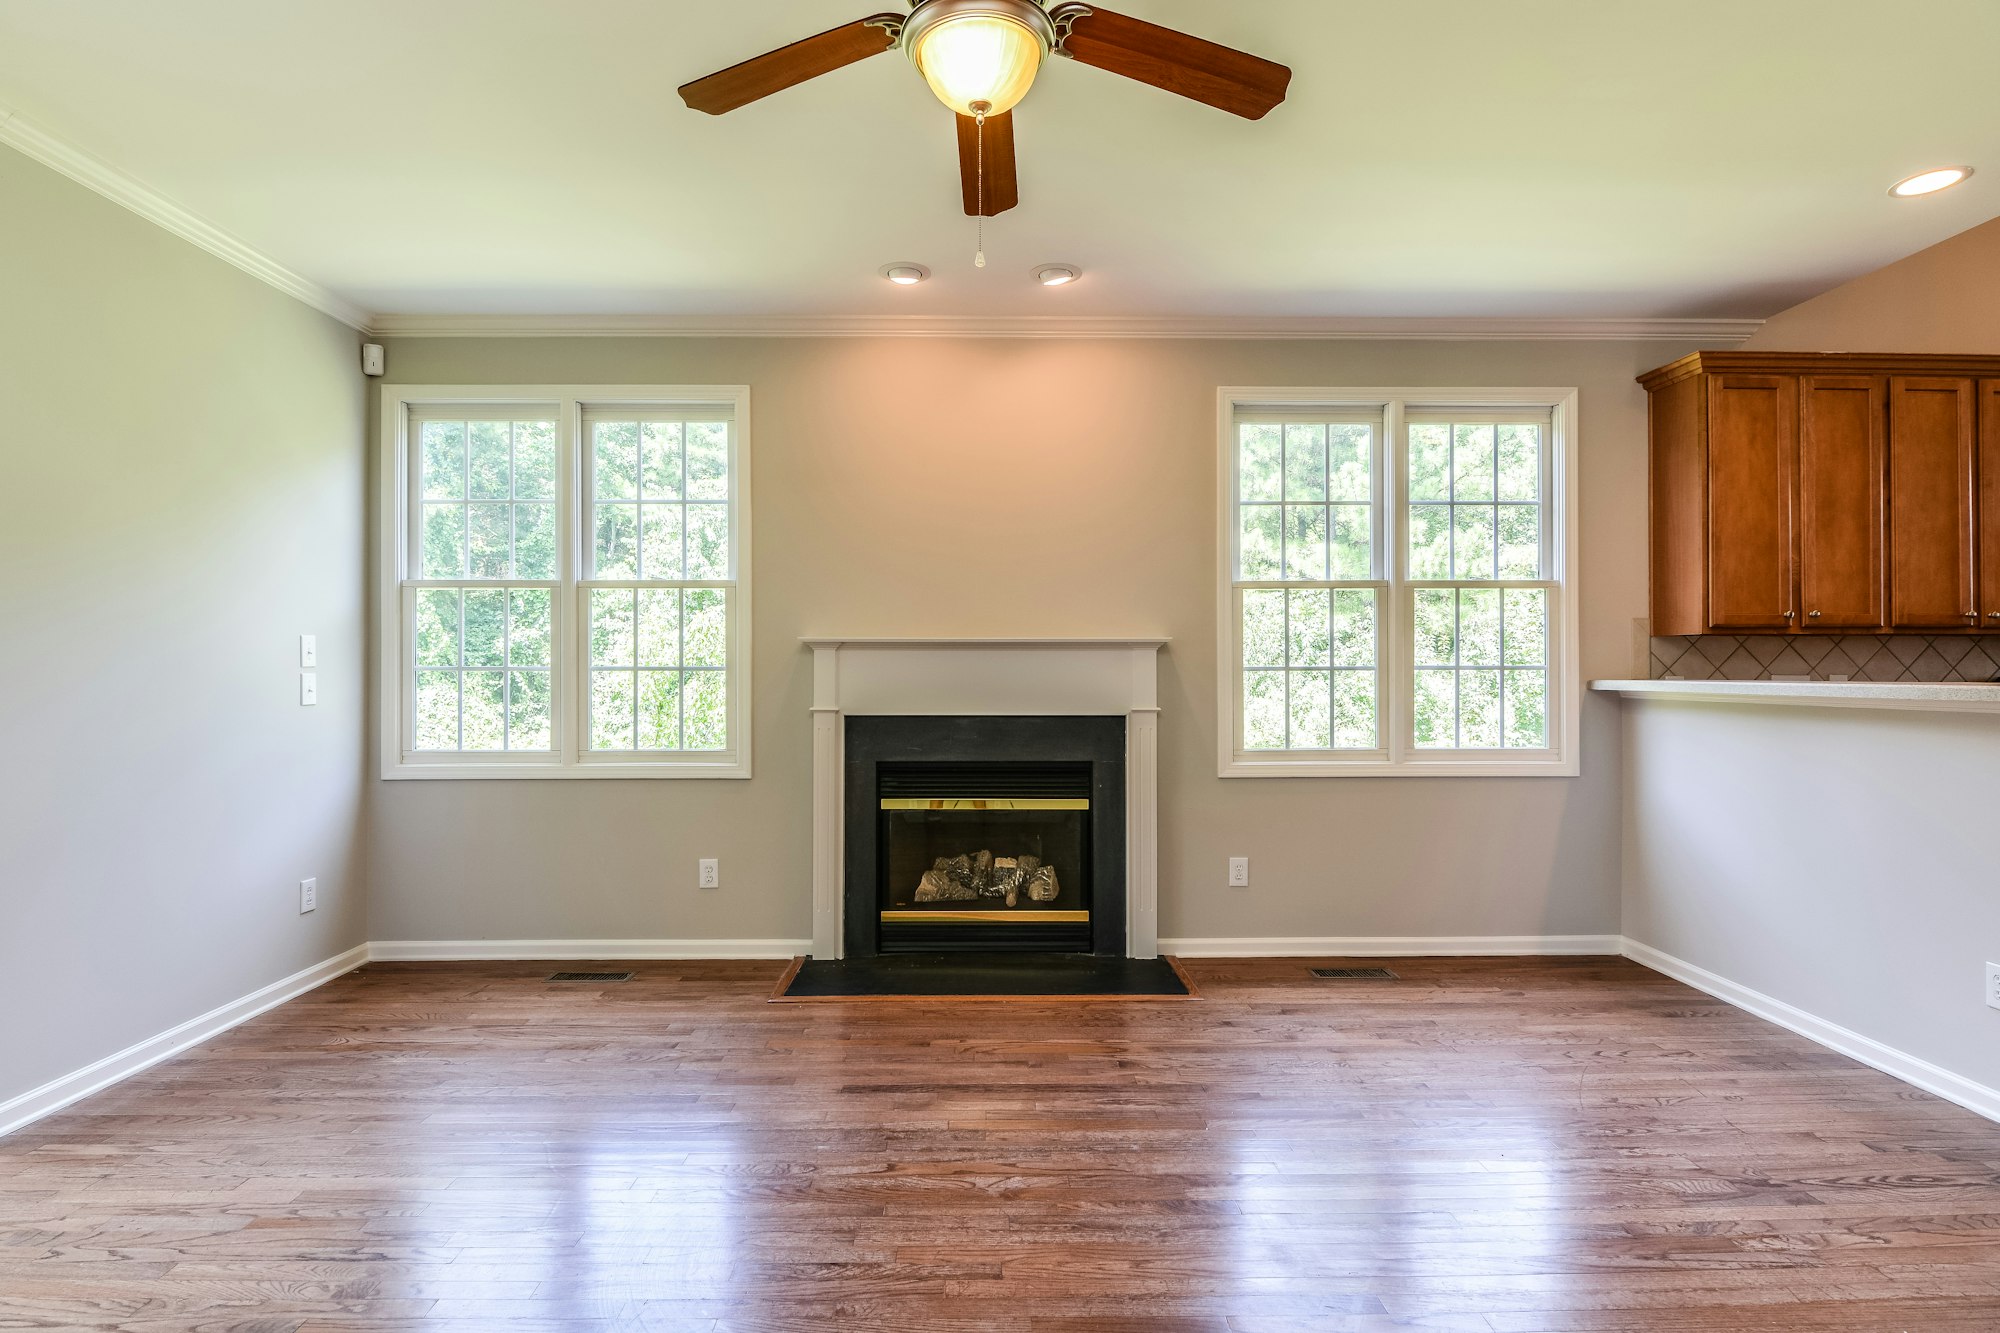 Photo 1 of 20 - 11905 Sycamore Grove Ln, Raleigh, NC 27614